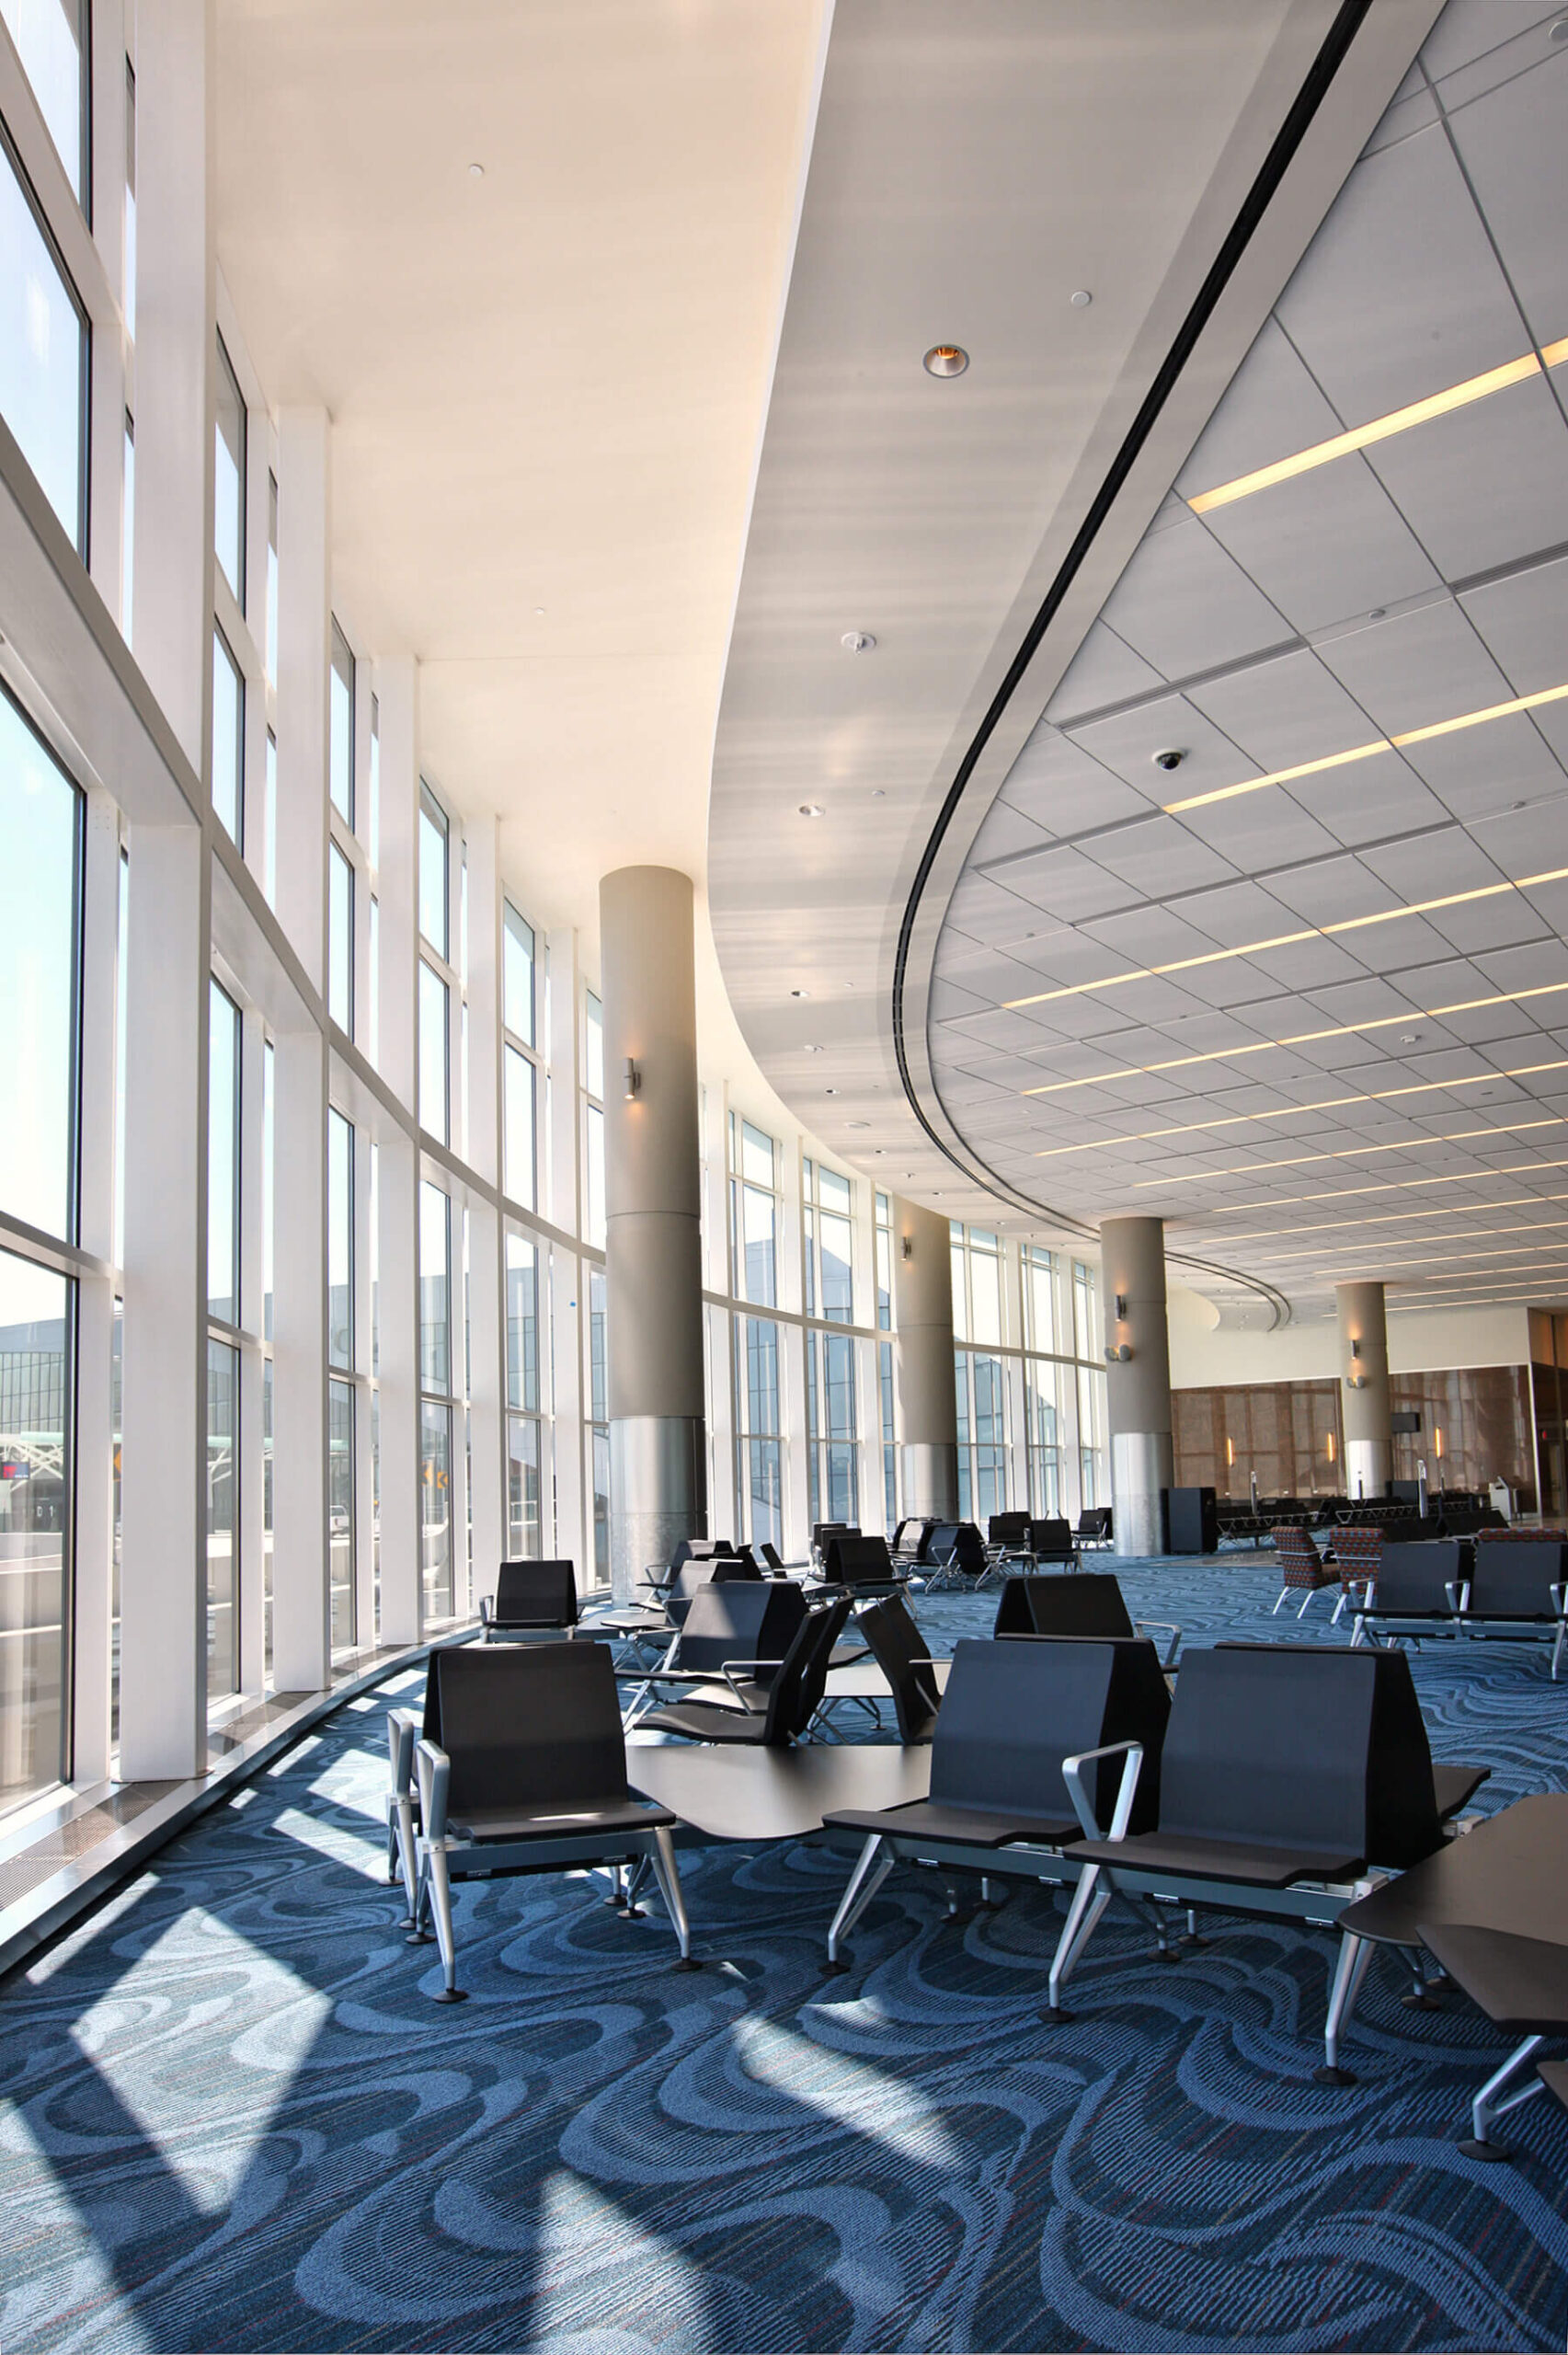 a seating area near the windows in the concourse at the international terminal at Hartsfield-Jackson Atlanta International Airport